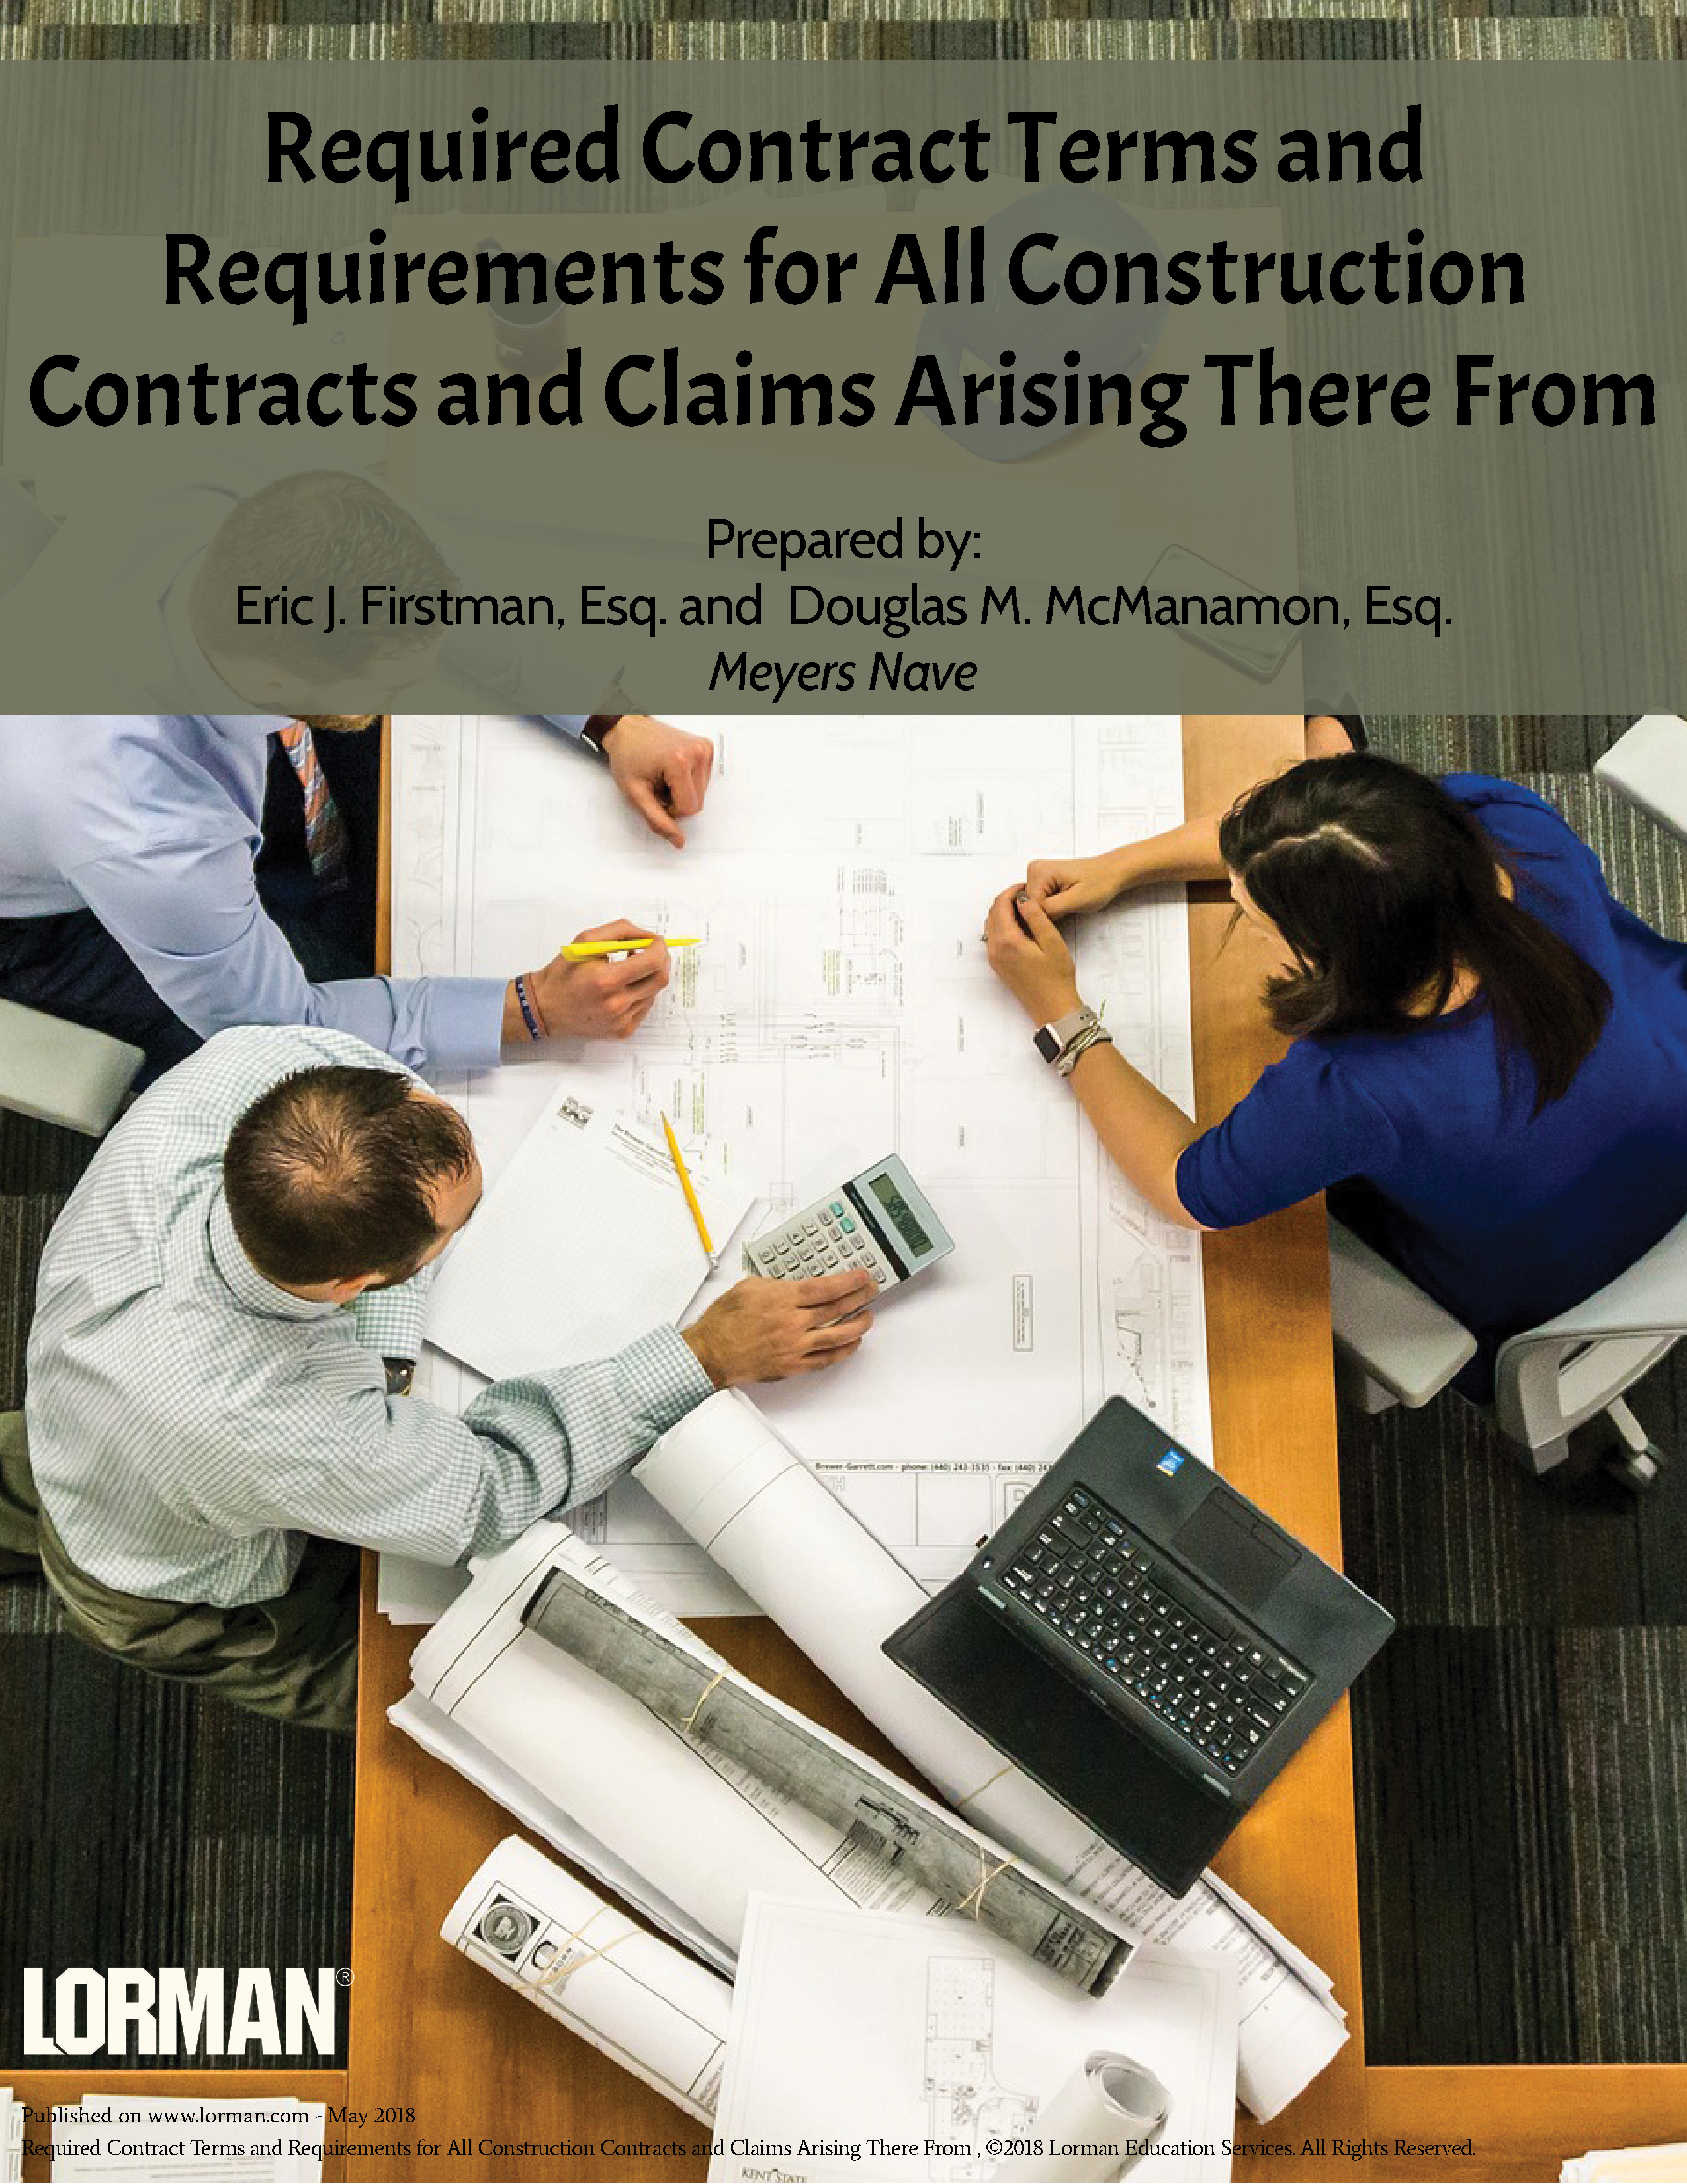 Required Contract Terms and Requirements for Construction Contracts and Claims Arising There From